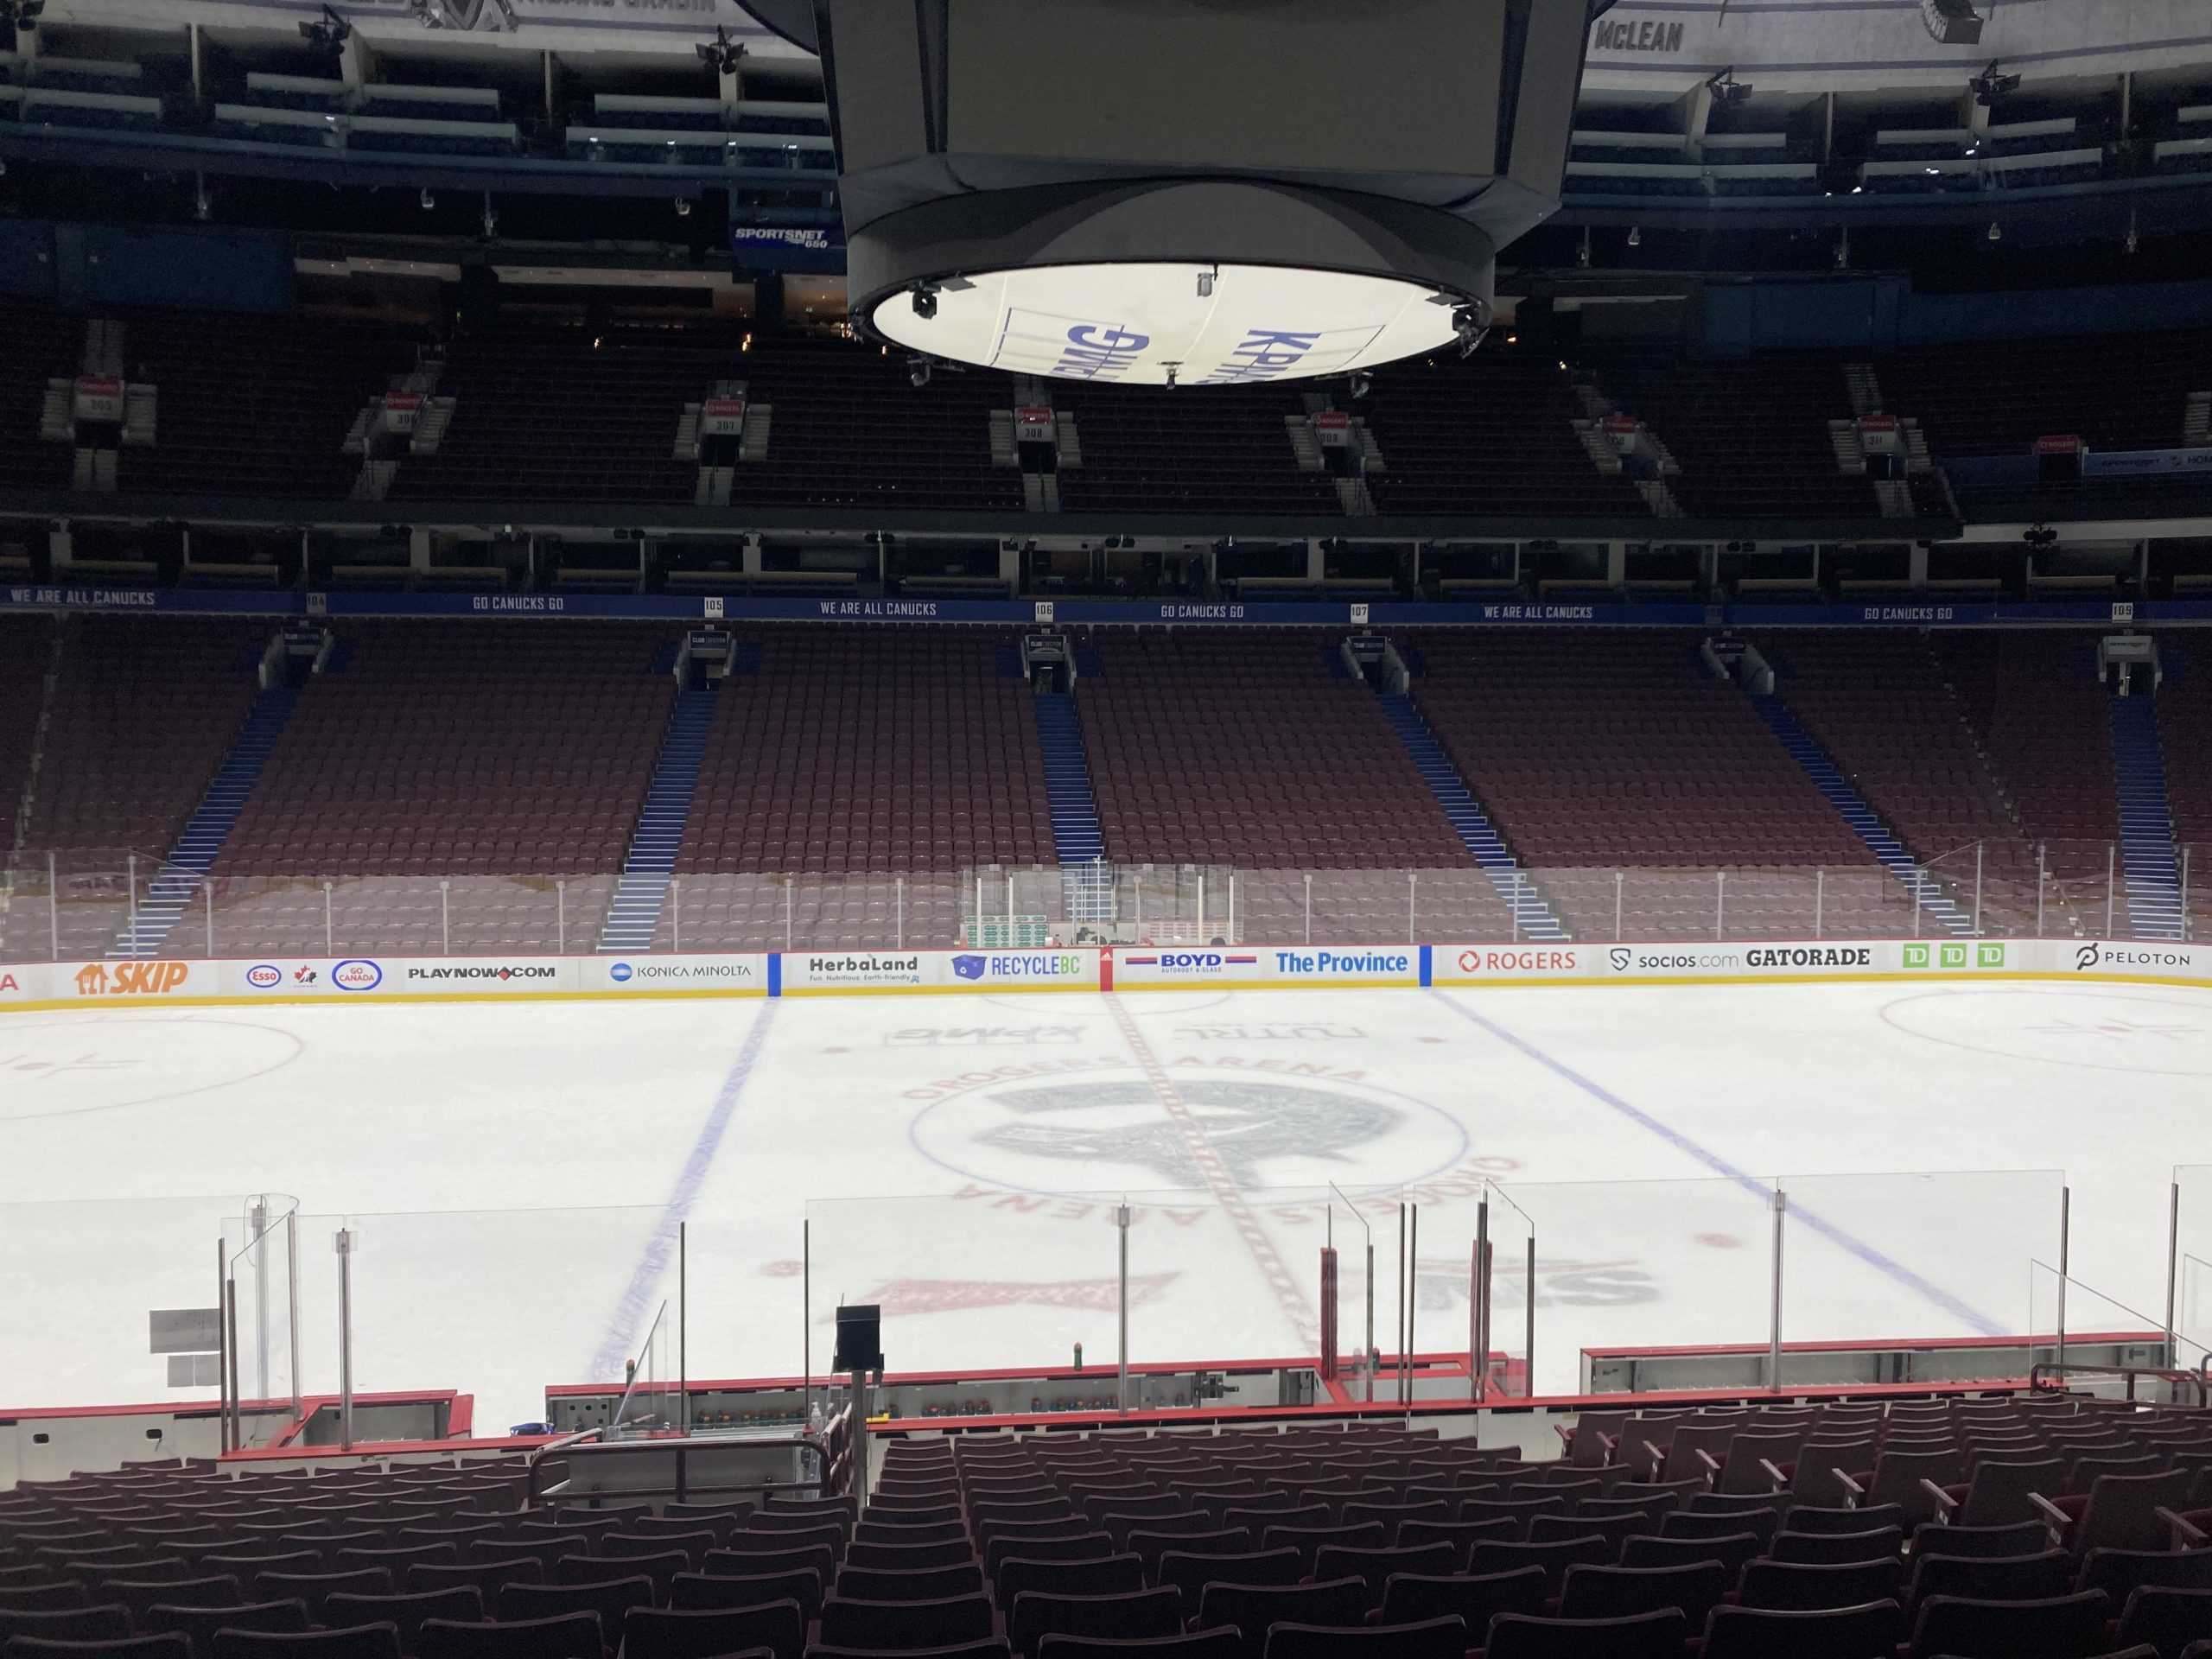 Rogers Arena, NHL rink